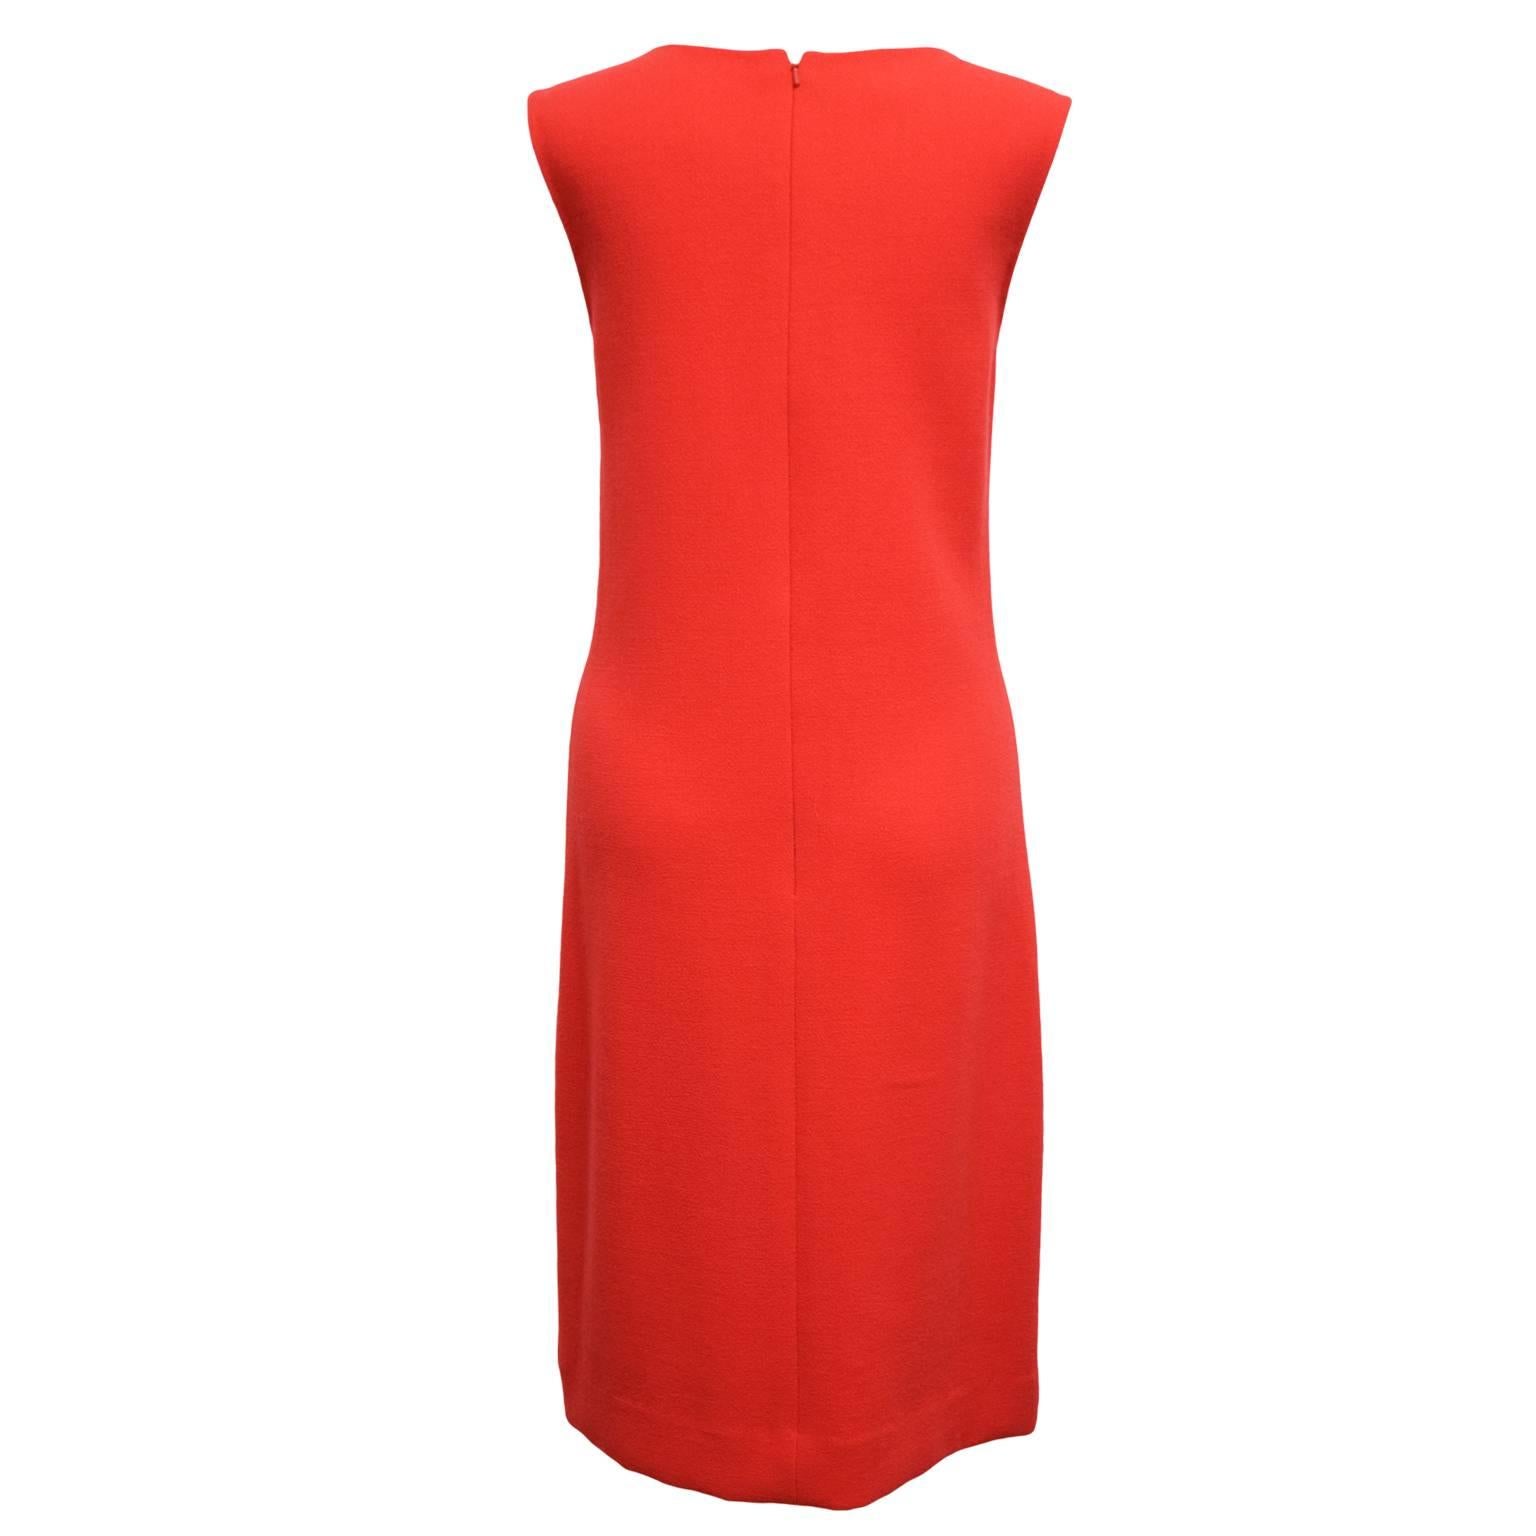 This Oscar de la Renta dress is a sexy beautiful red wool and silk blend, and has patchwork front detailing with Eyelash fringe for contrast and geometry. Fully lined.